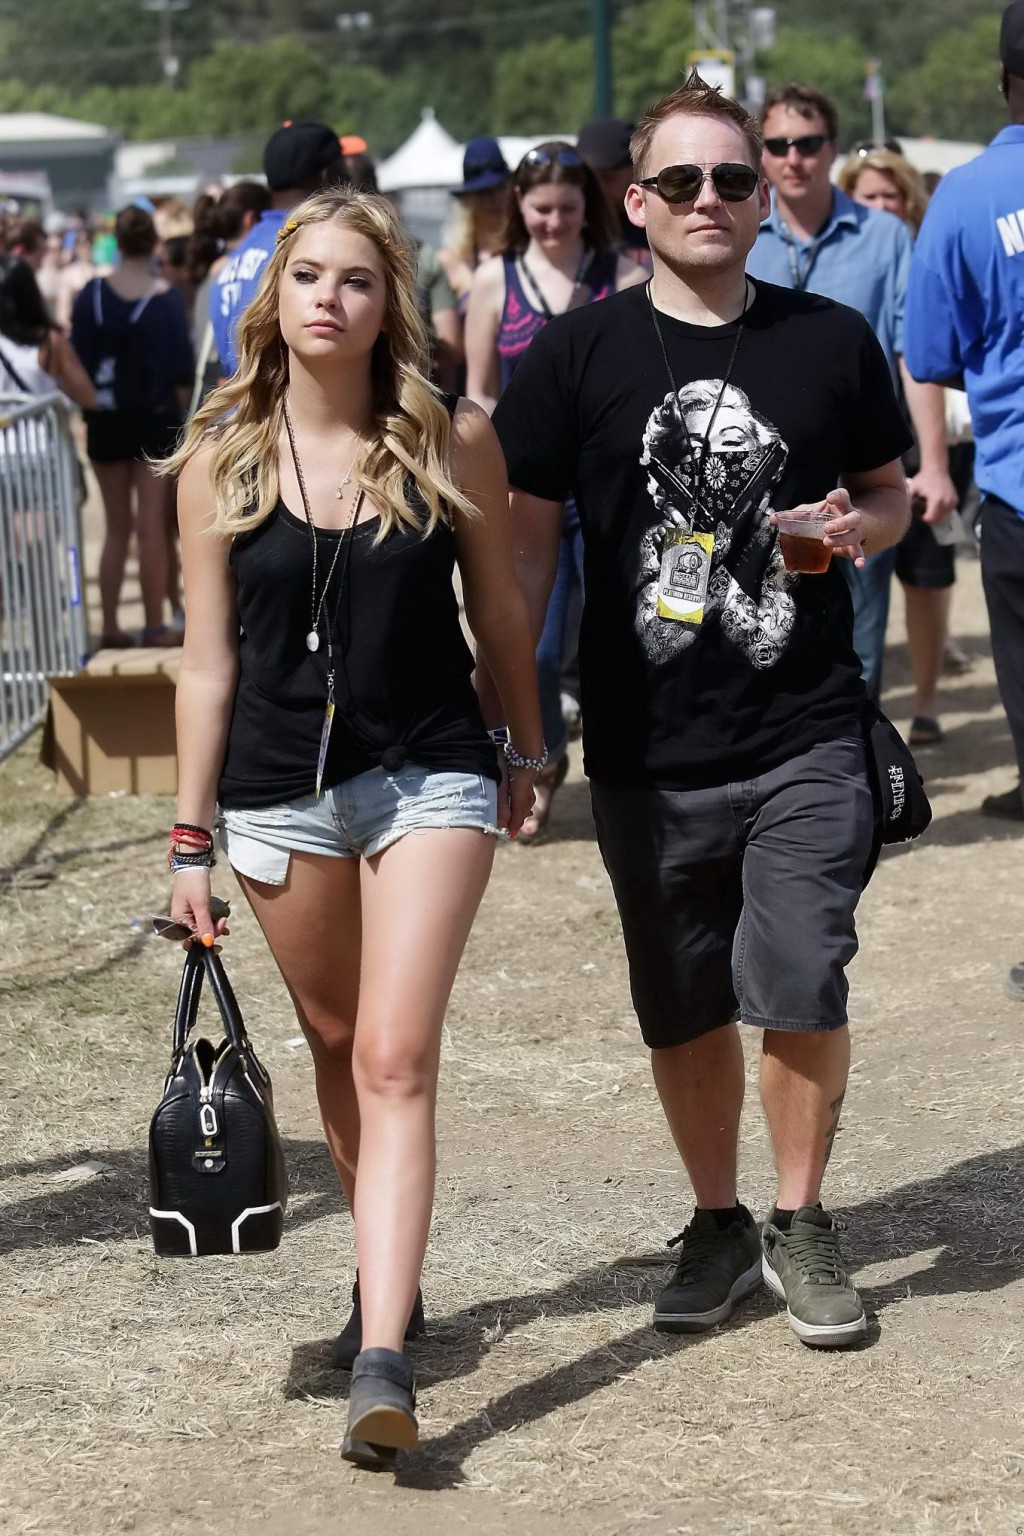 Ashley Benson wearing transparent tank top and hotpants at the Bandeau festival  #75232544